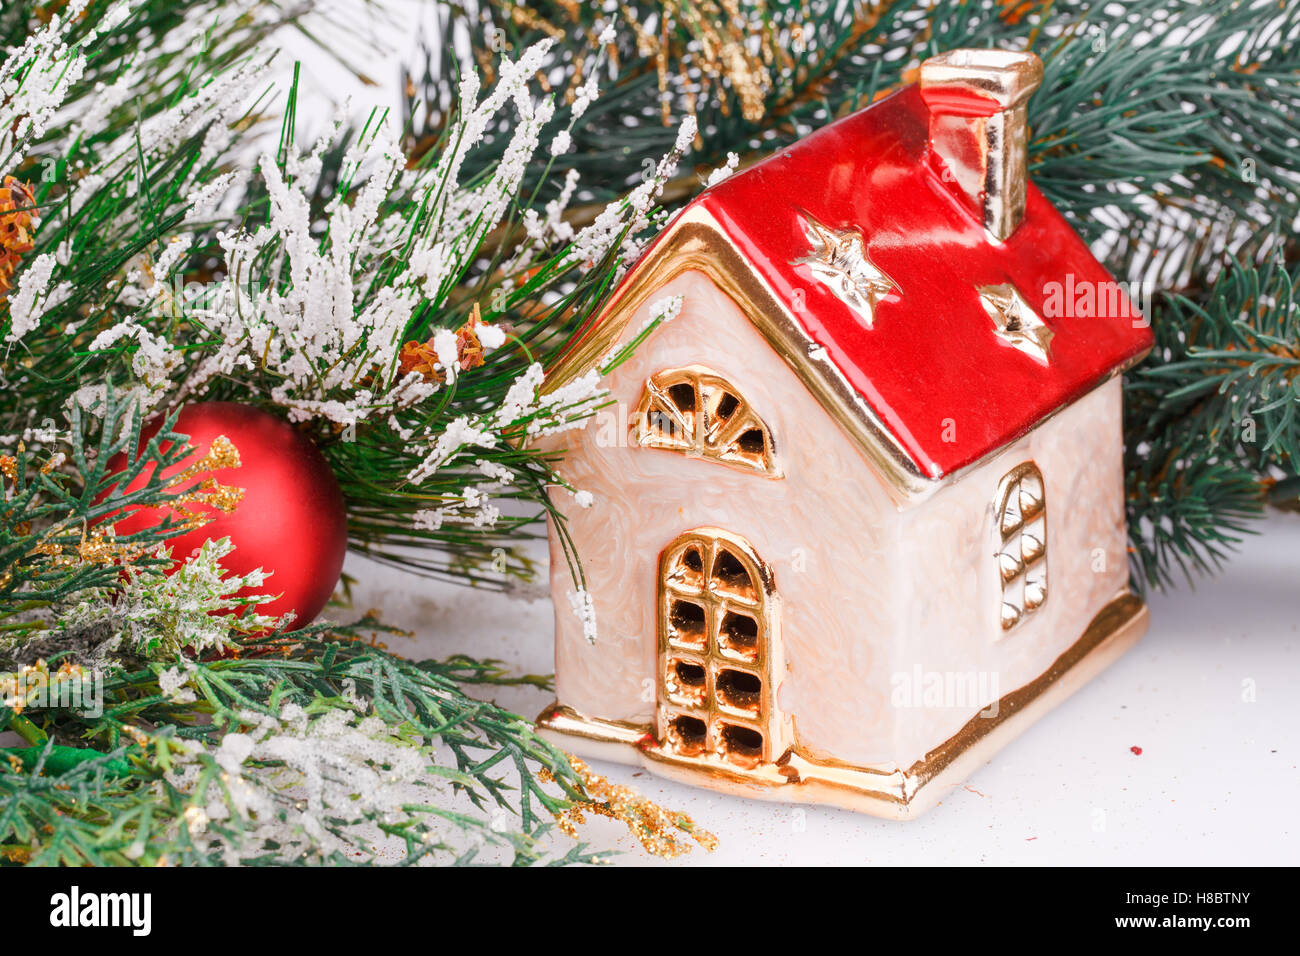 Christmas decoration with red ball, fir-tree branch and toy house. Stock Photo